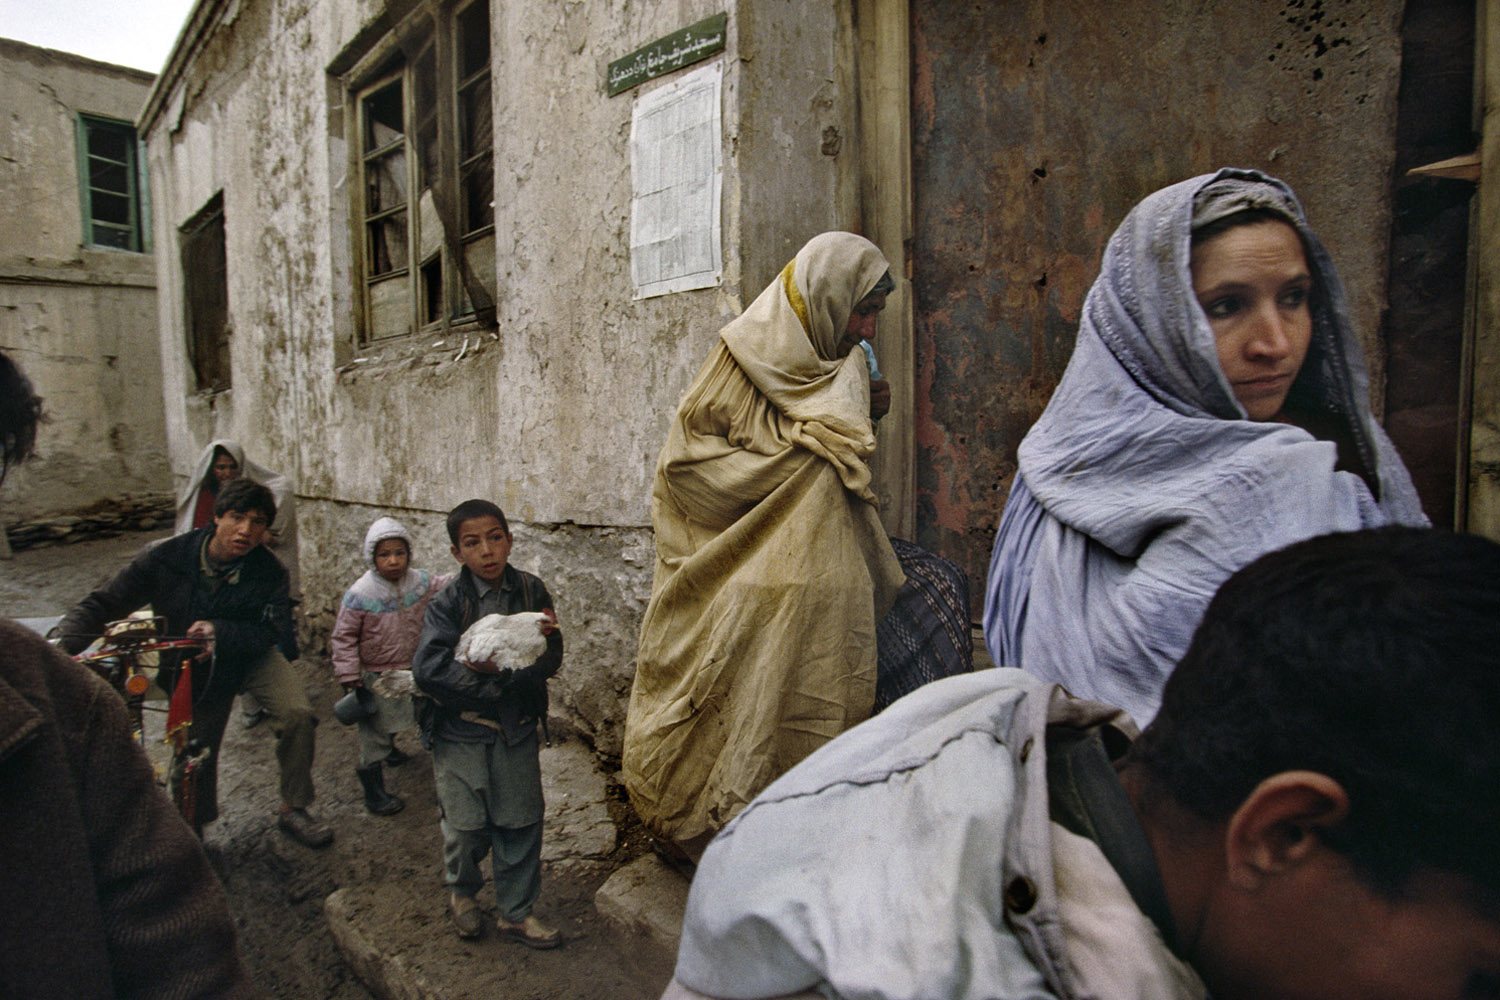 A family flees their home during factional fighting between President Rabbani government forces and the Hezb-e-Wahdat party made up of minority Hazaras. The fighting occurred near the Afshar neighborhood where a massacre of Hazara residents and militia occurred a few weeks before. March, 1993